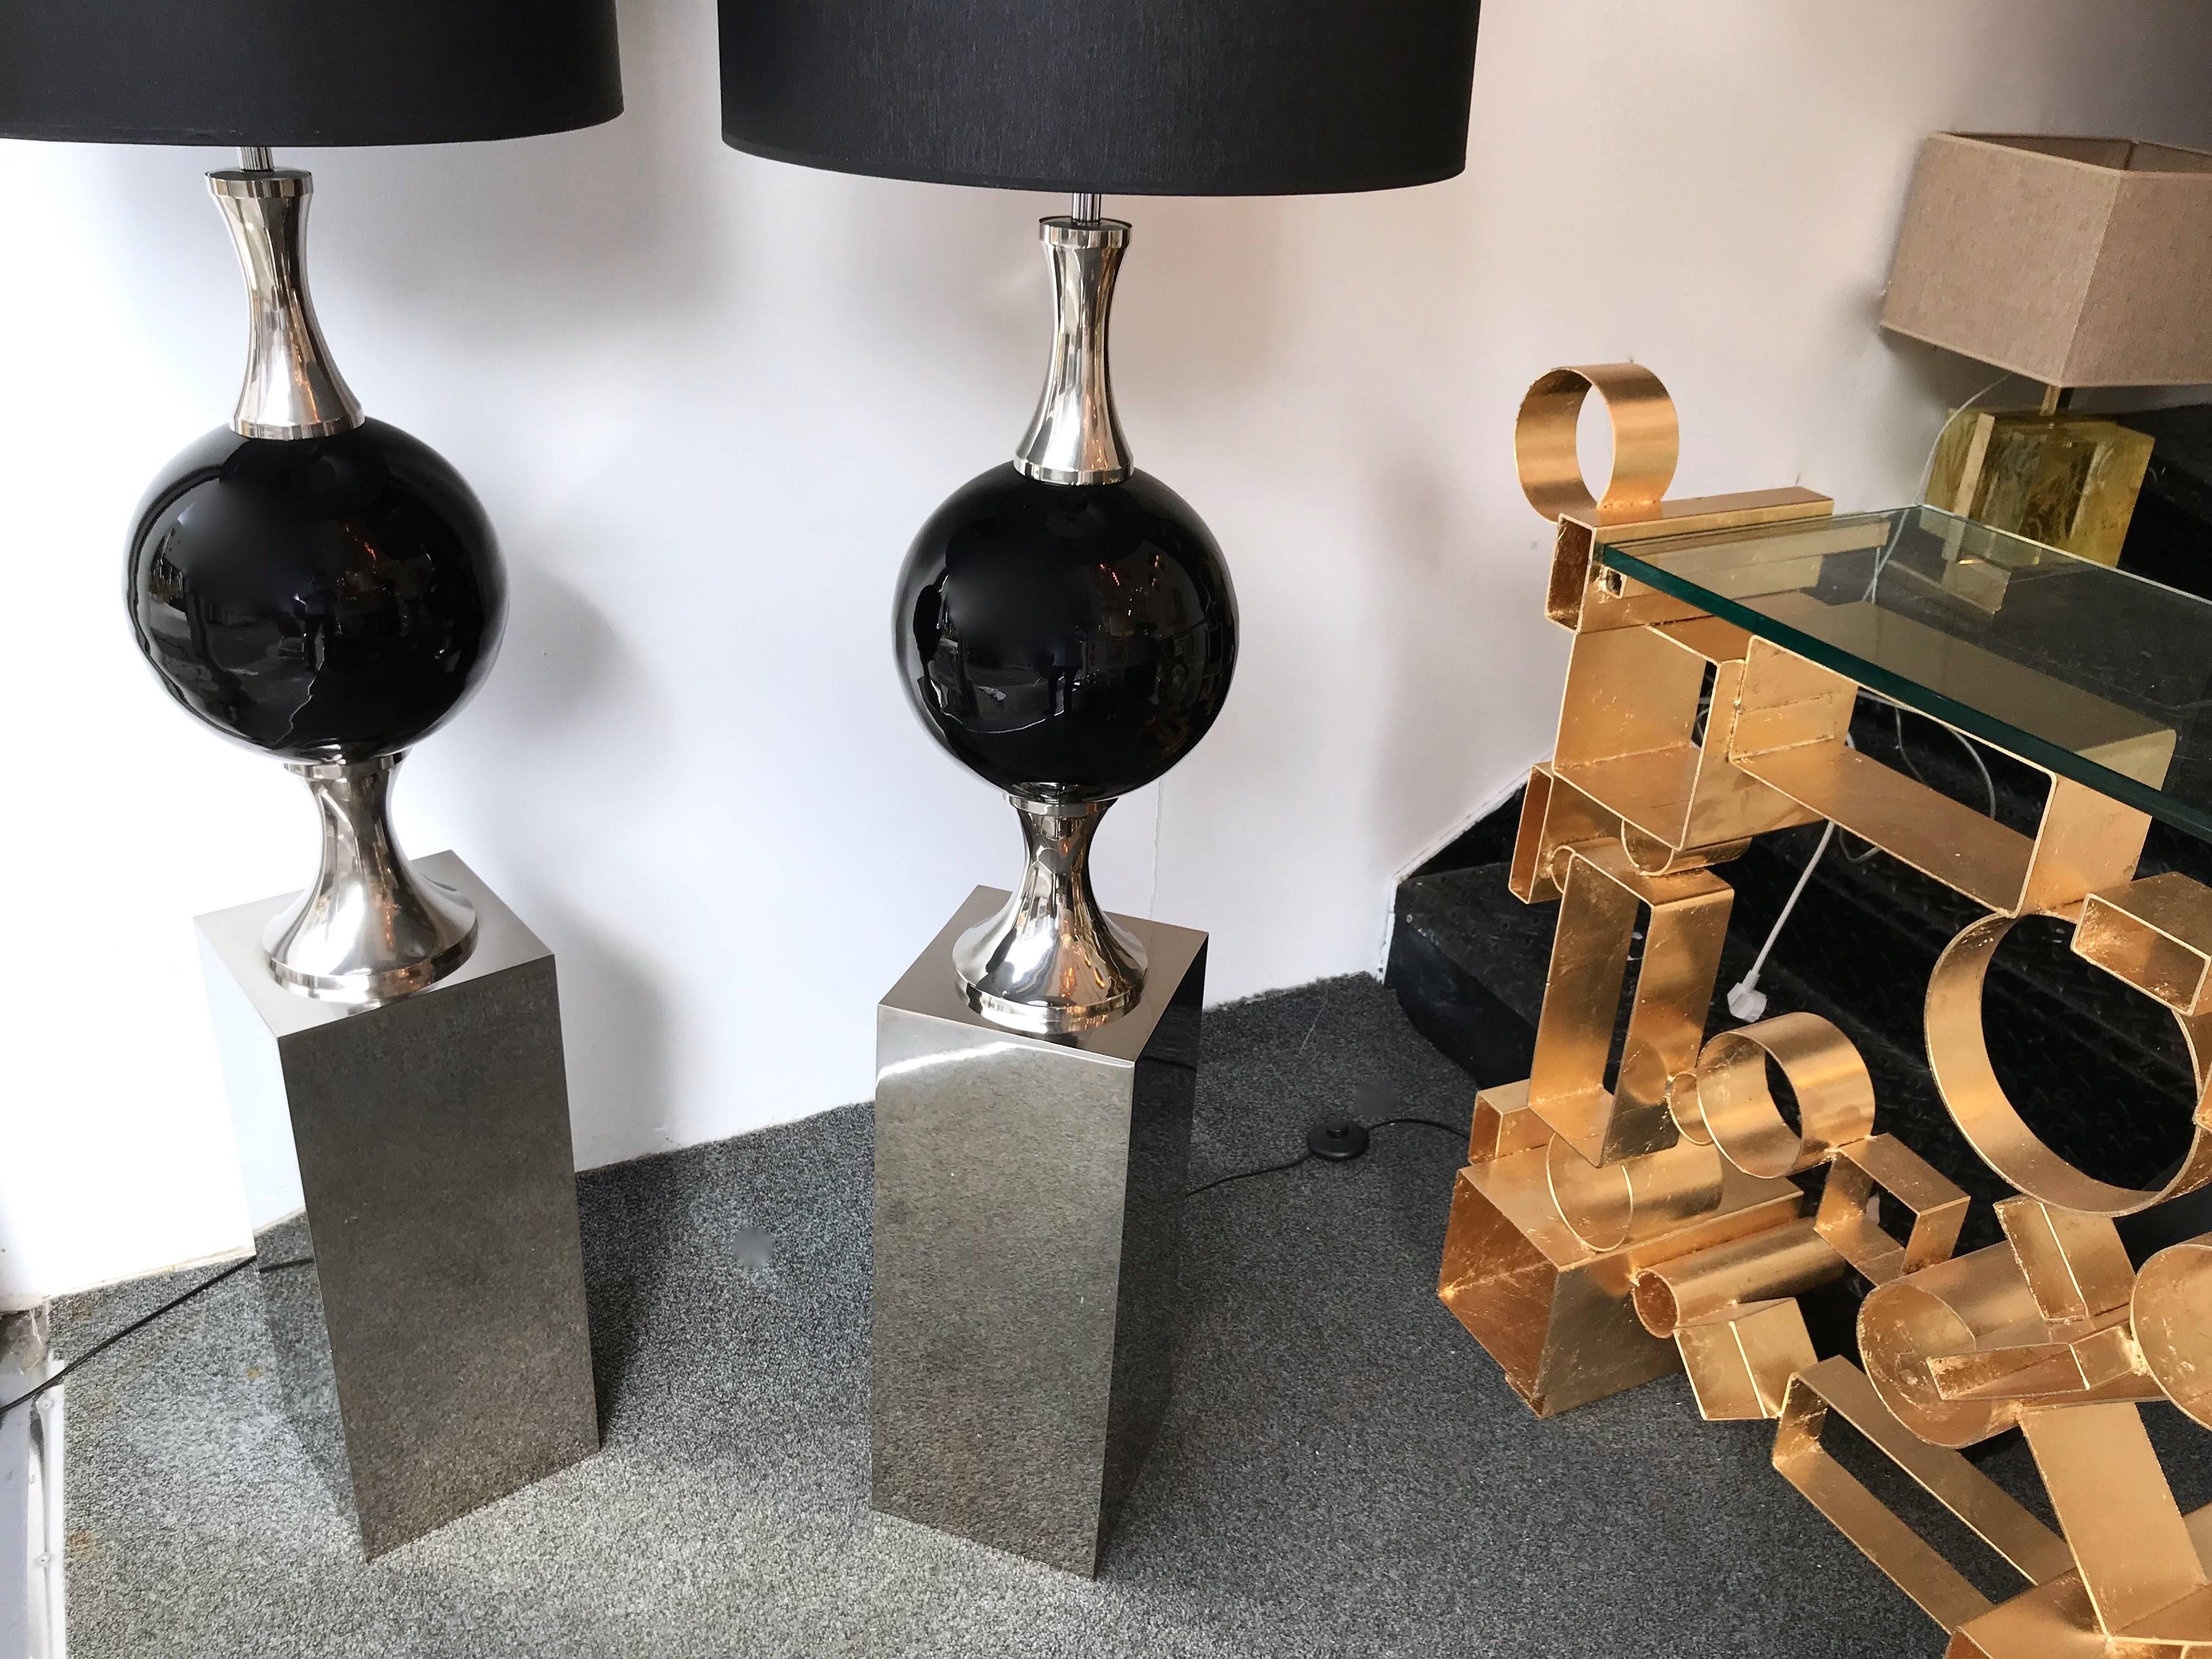 Pair of metal chrome floor lamps by Maison Barbier, rare version with black lacquered sphere, slightly in a nice neoclassical style. Famous manufacture like Maison Jansen, Bagues, Charles, Hollywood Regency, Sciolari, Reggiani, Maison Rougier.